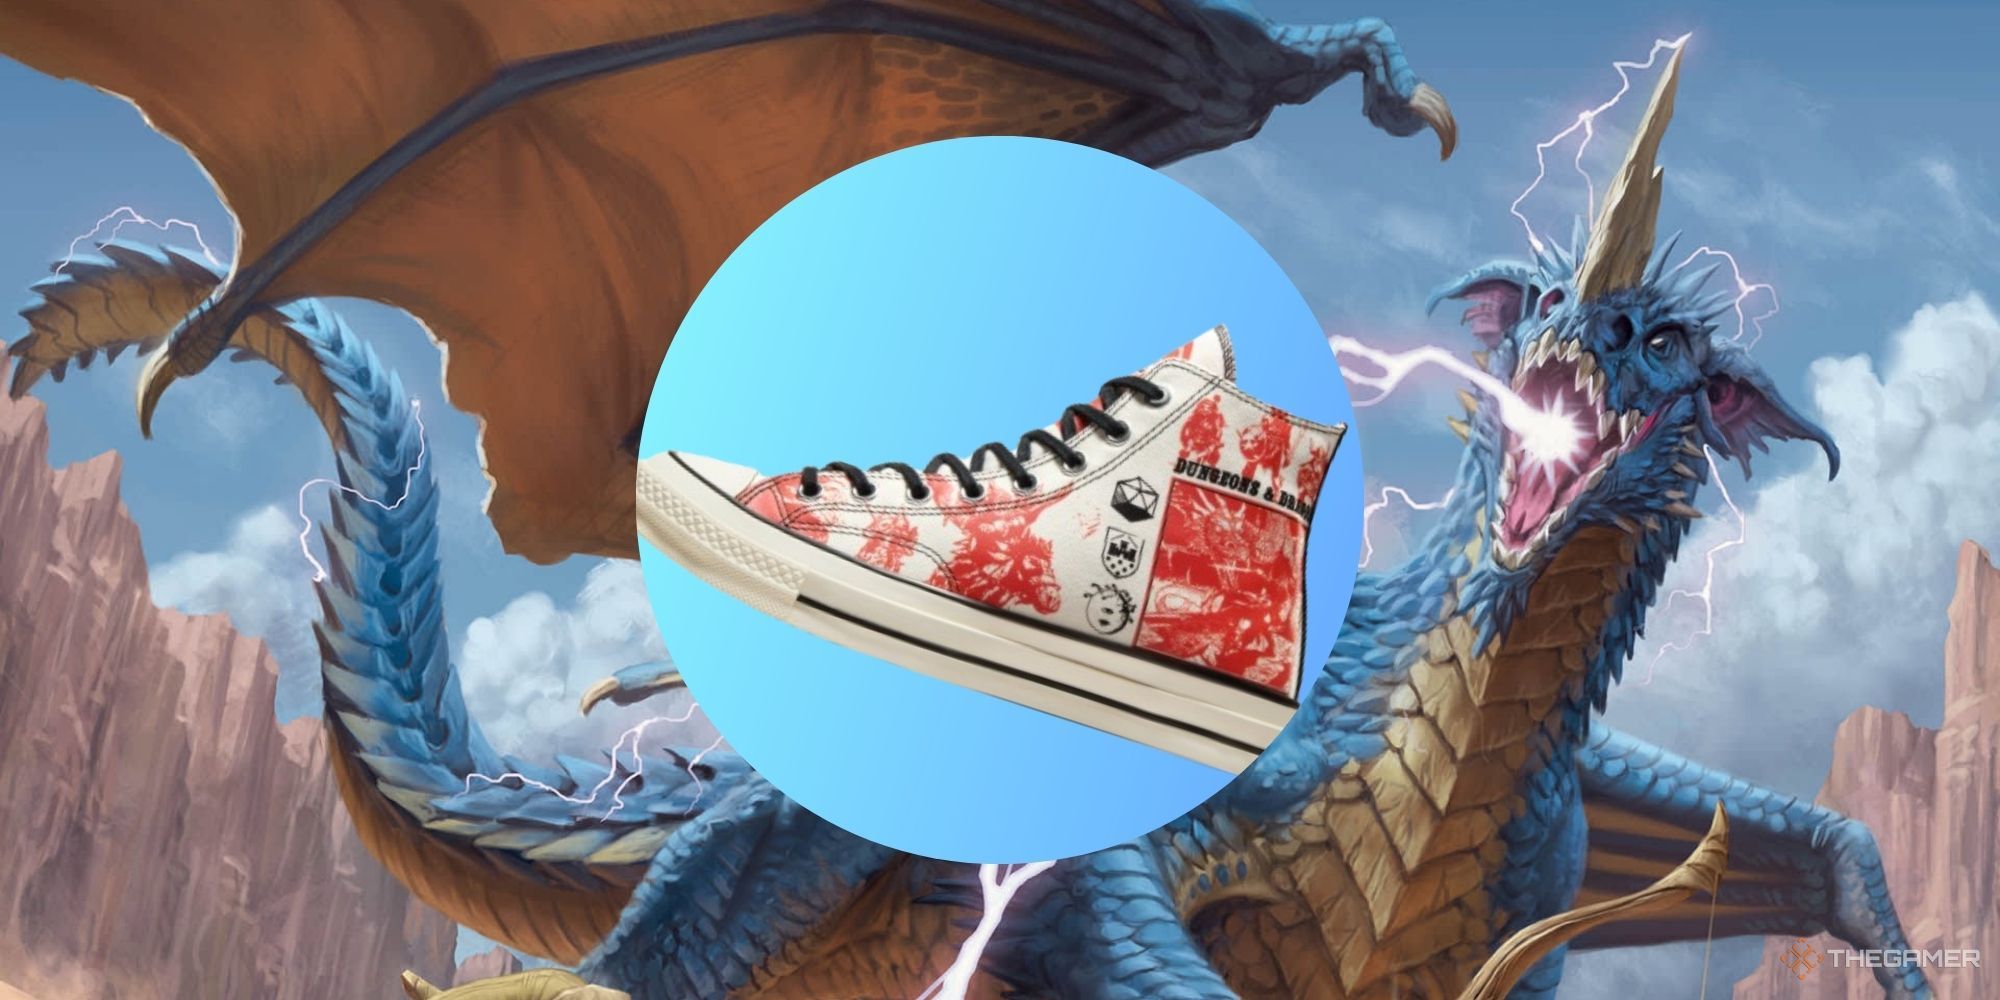 Dungeons & Dragons Converse Crossover Collection Is Available Now